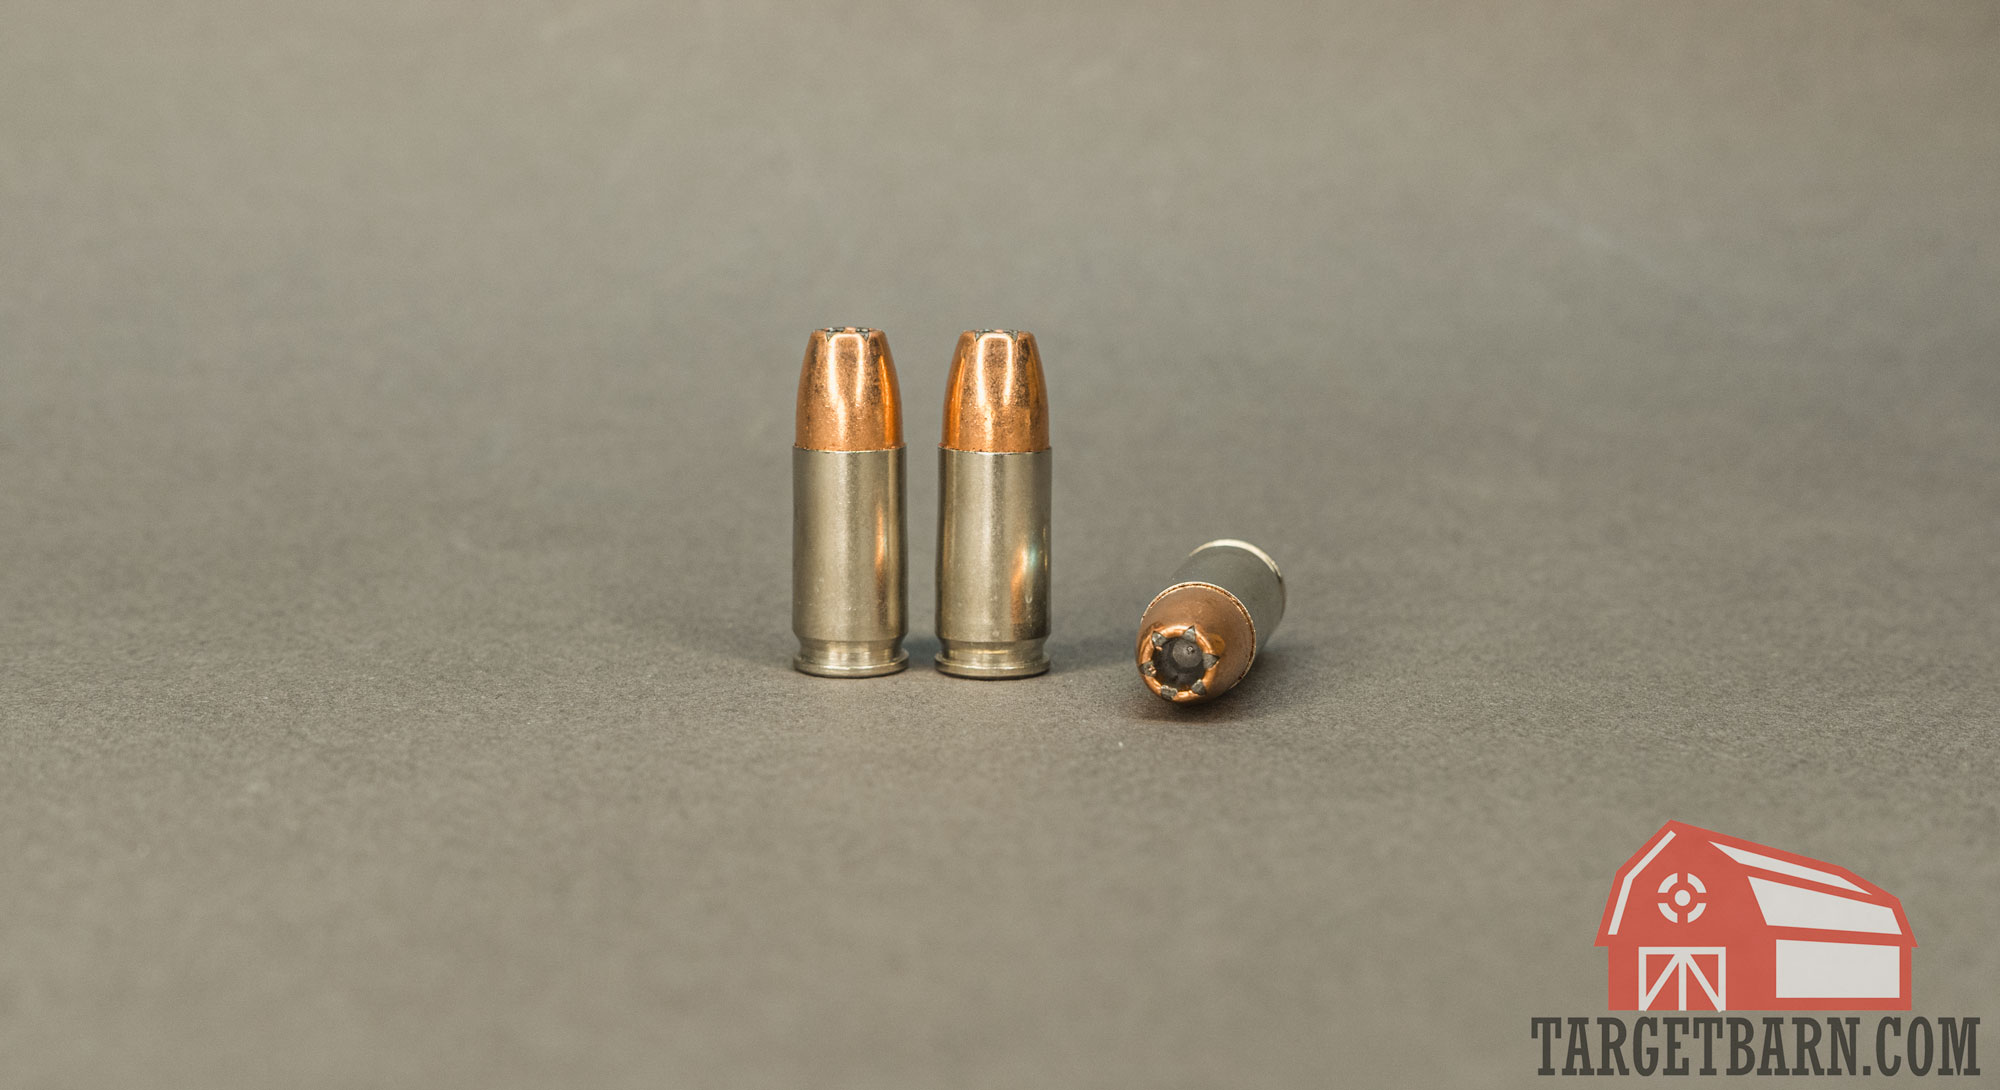 three rounds of speer gold dot 9mm showing its design